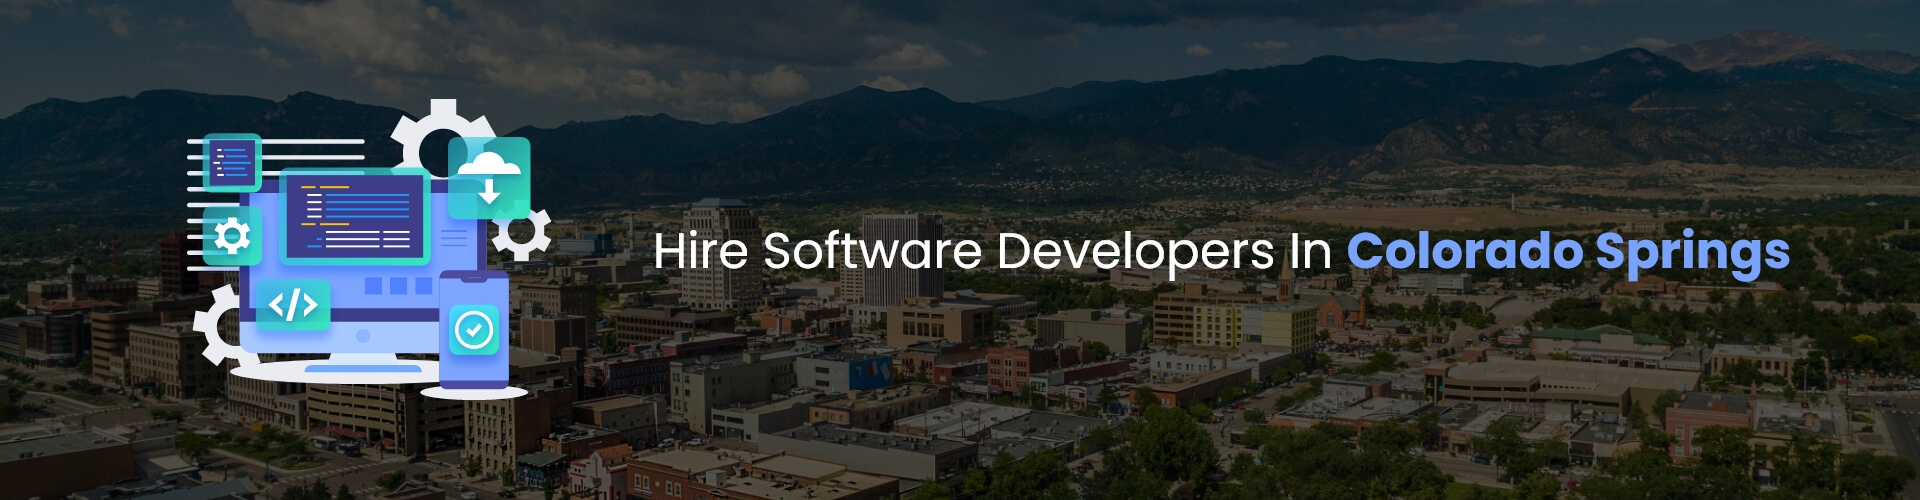 hire software developers in colorado springs